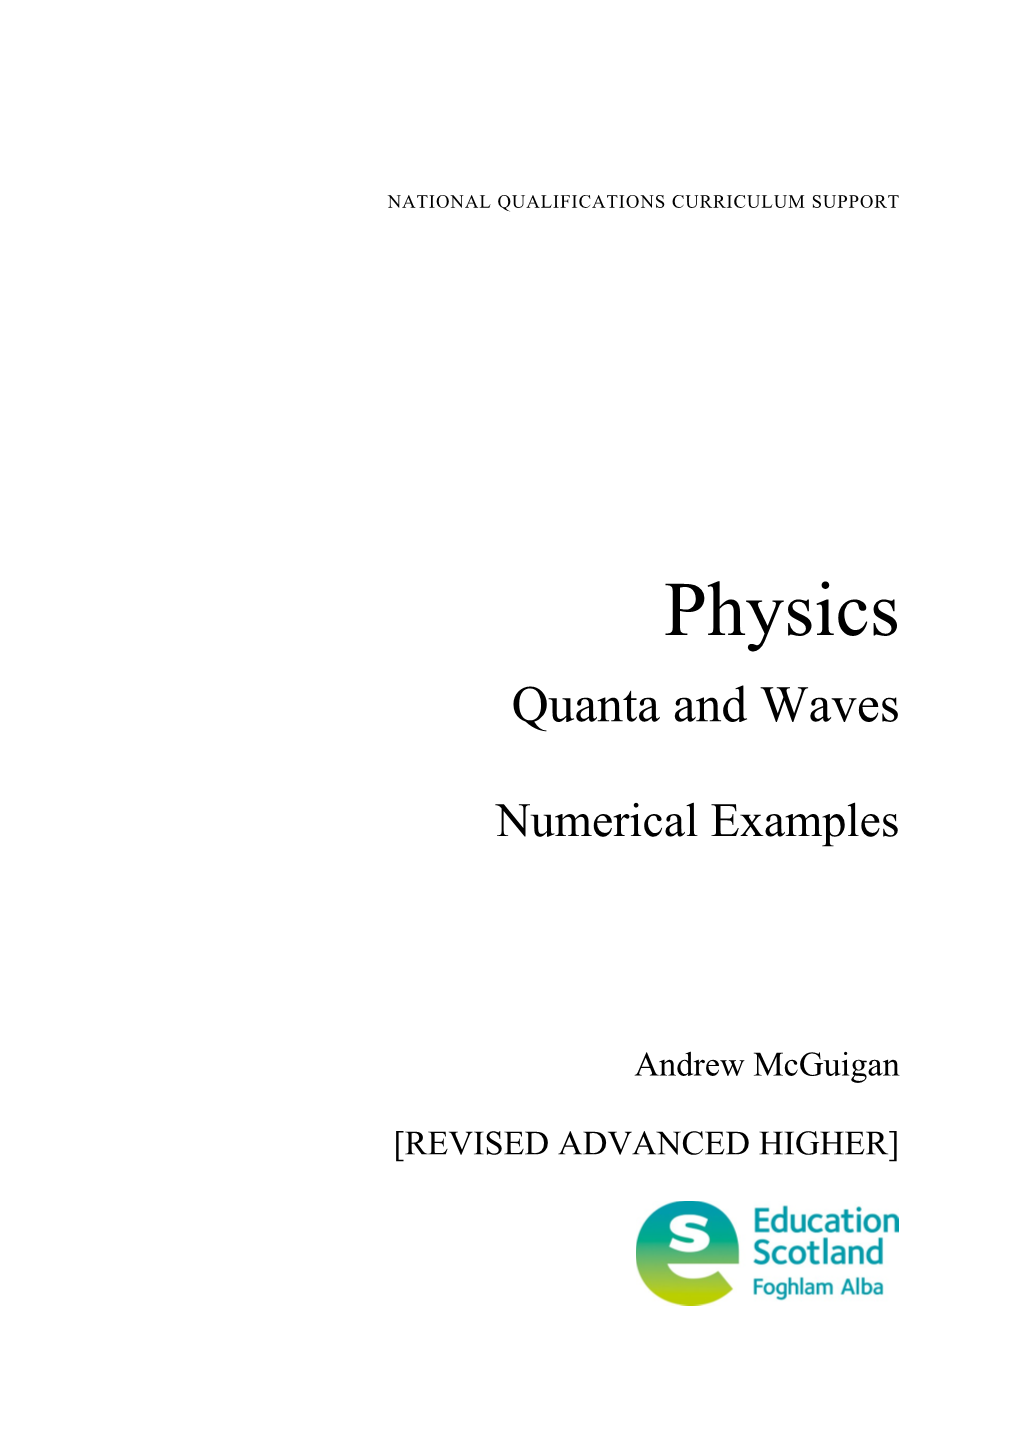 Physics - Quanta and Waves: Numerical Examples (Revised Advanced Higher)